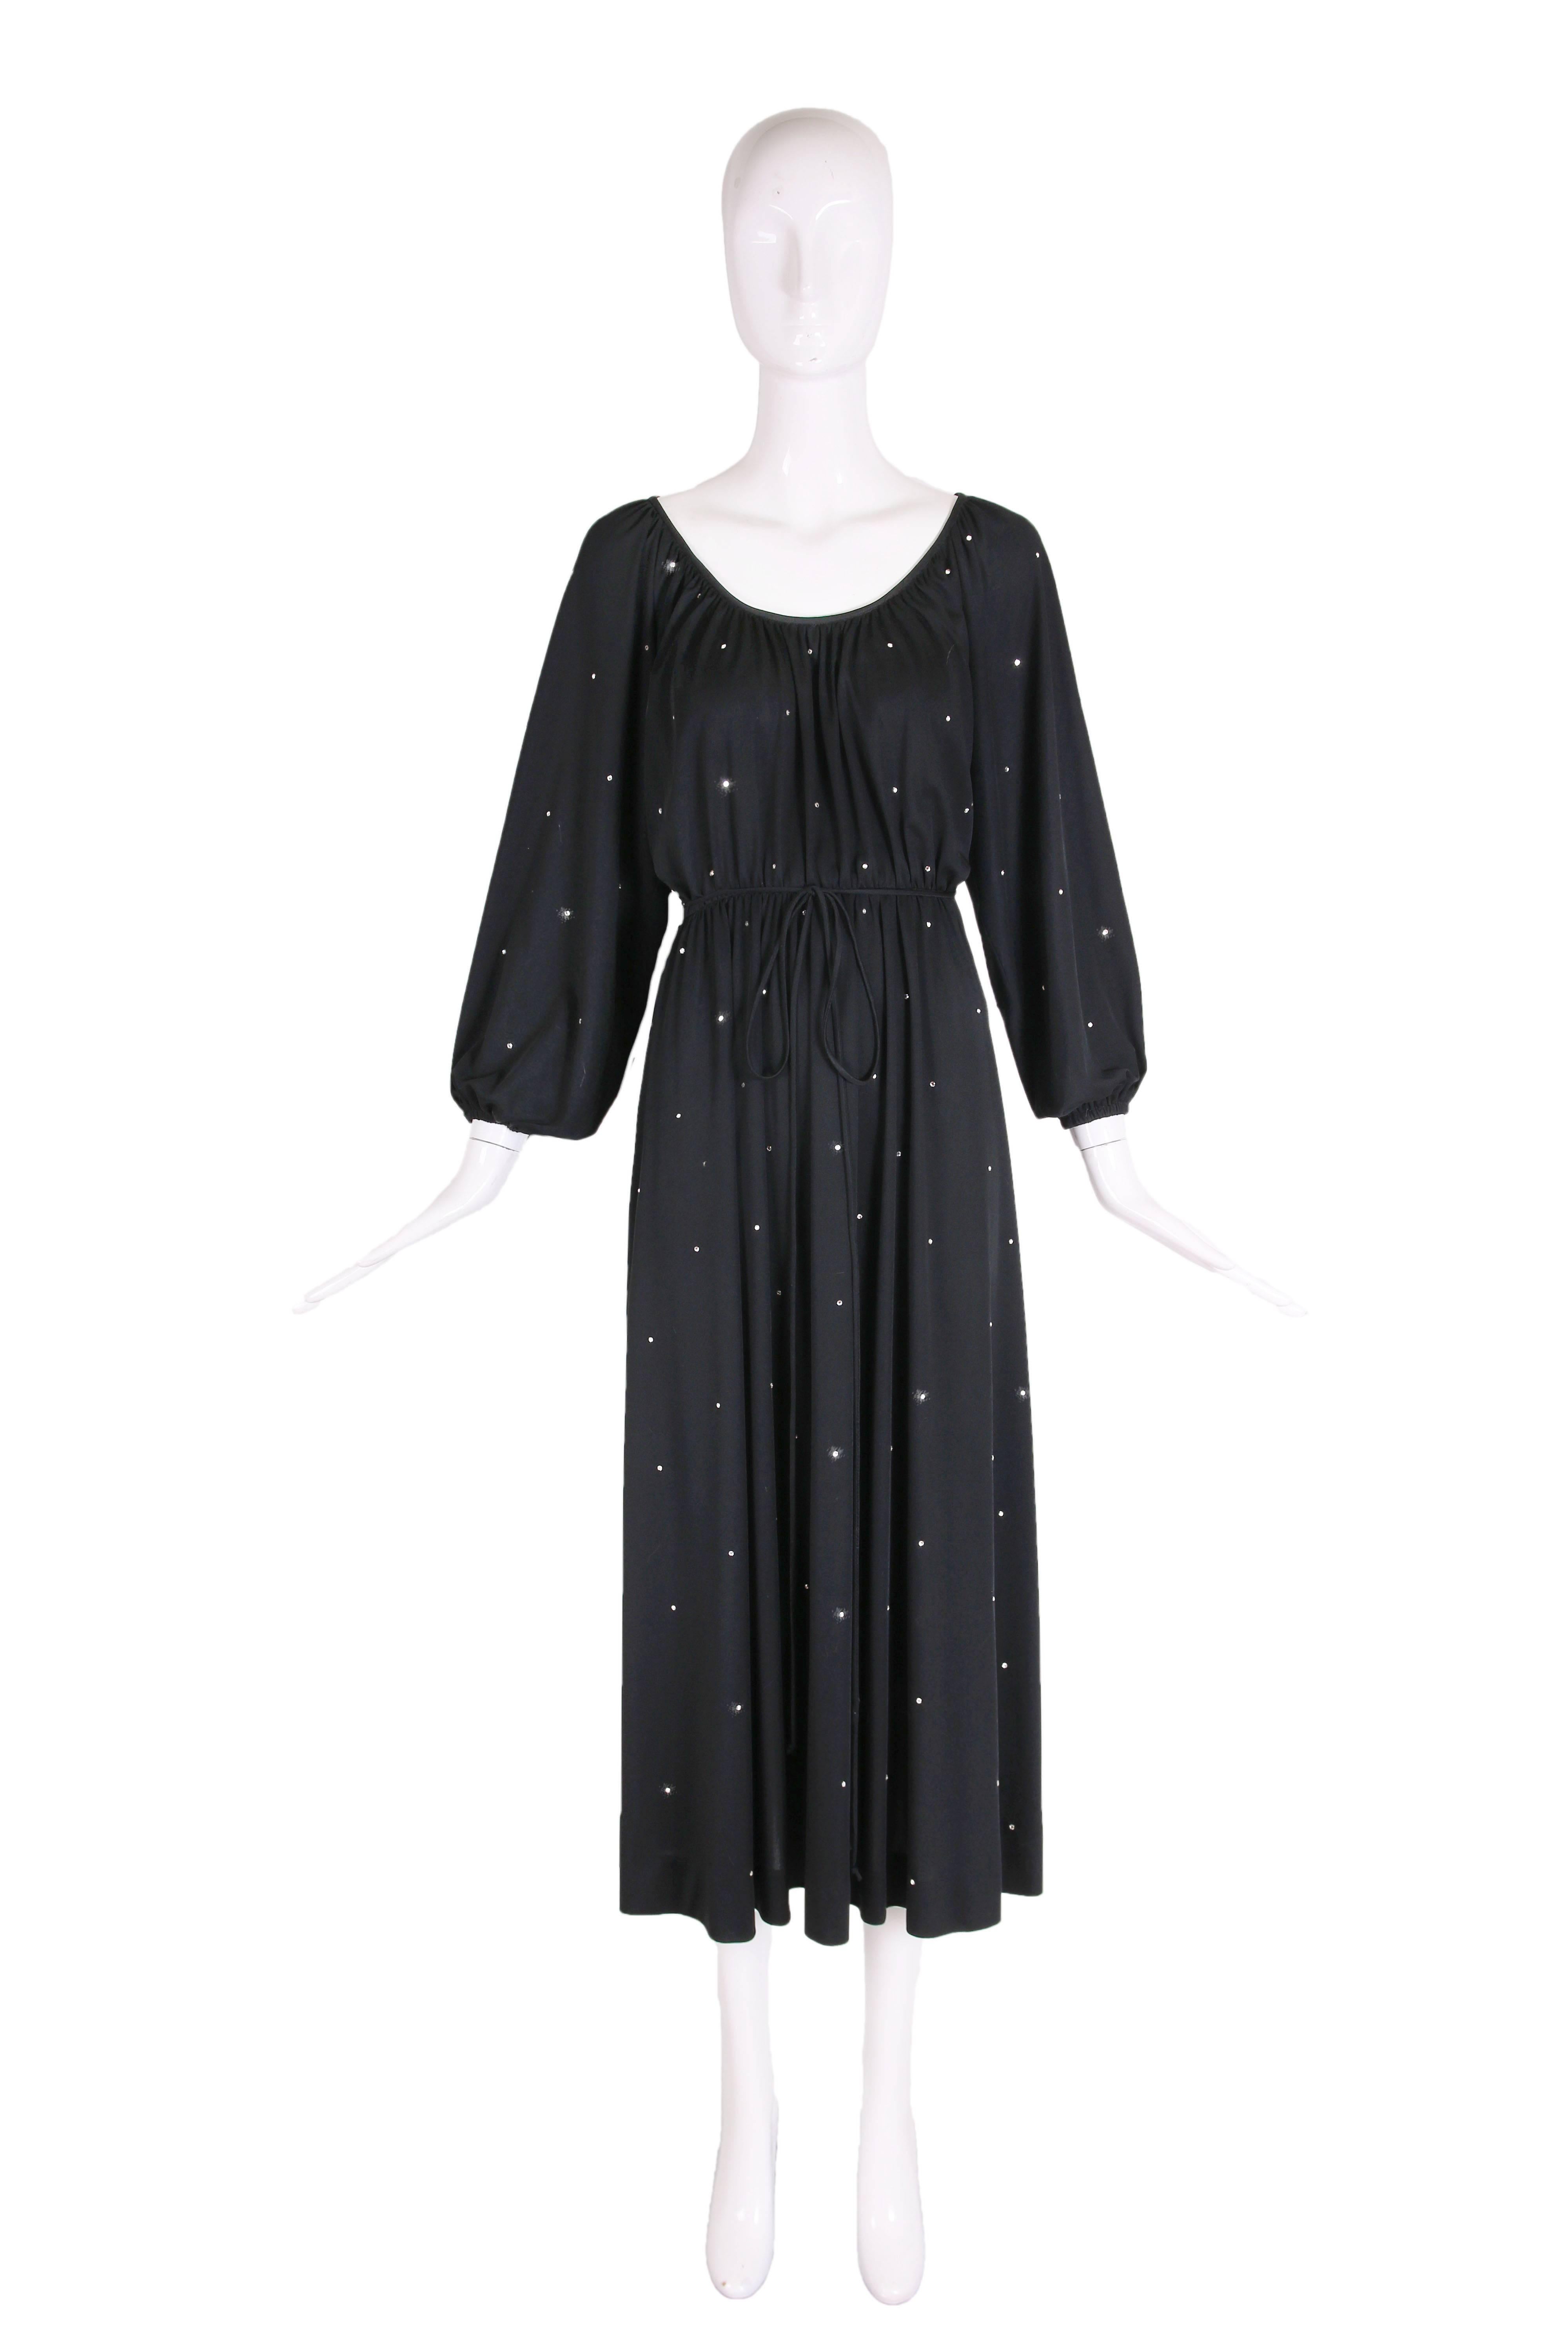 1970's Donald Brooks black jersey disco dress with rhinestone embellishments, subtle balloon sleeves, scoop neck, gathered waist, jersey string waist ties and a back zipper closure. In excellent condition. No size tag, please consult measurements.